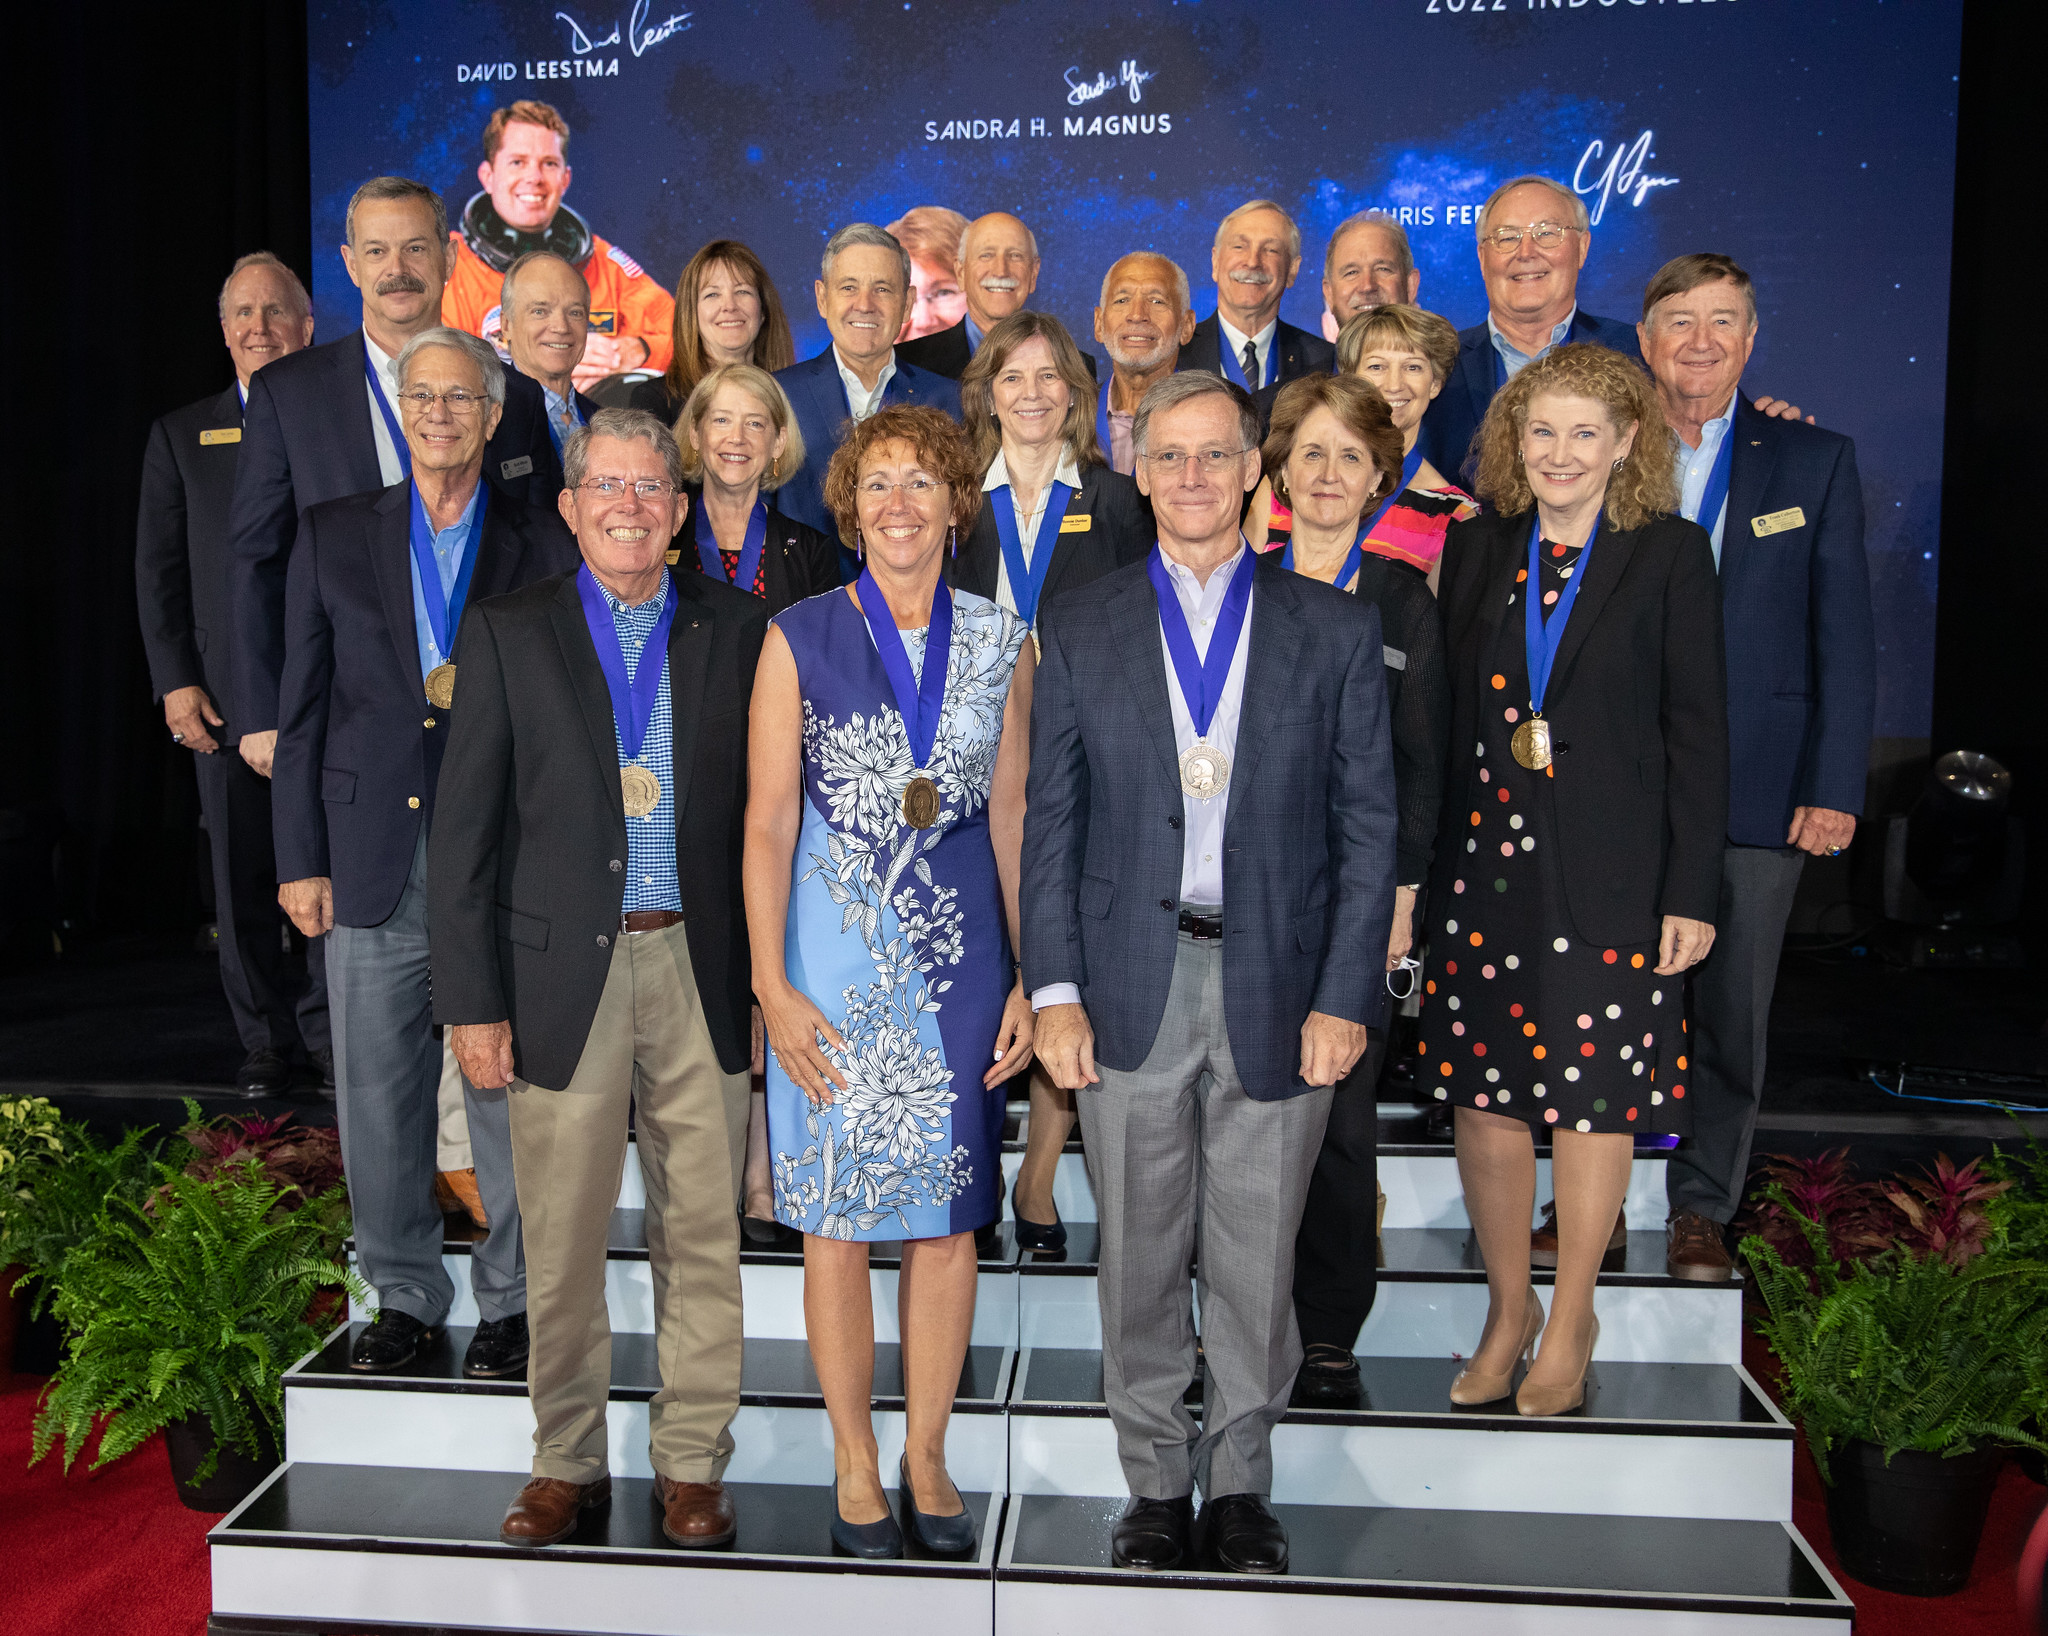 Three former NASA astronauts, David Leestma, Sandra Magnus, and Chris Ferguson, were inducted into the U.S. Astronaut Hall of Fame (AHOF) Class of 2022 during a ceremony on June 11, 2022, at NASA’s Kennedy Space Center Visitor Complex in Florida. 